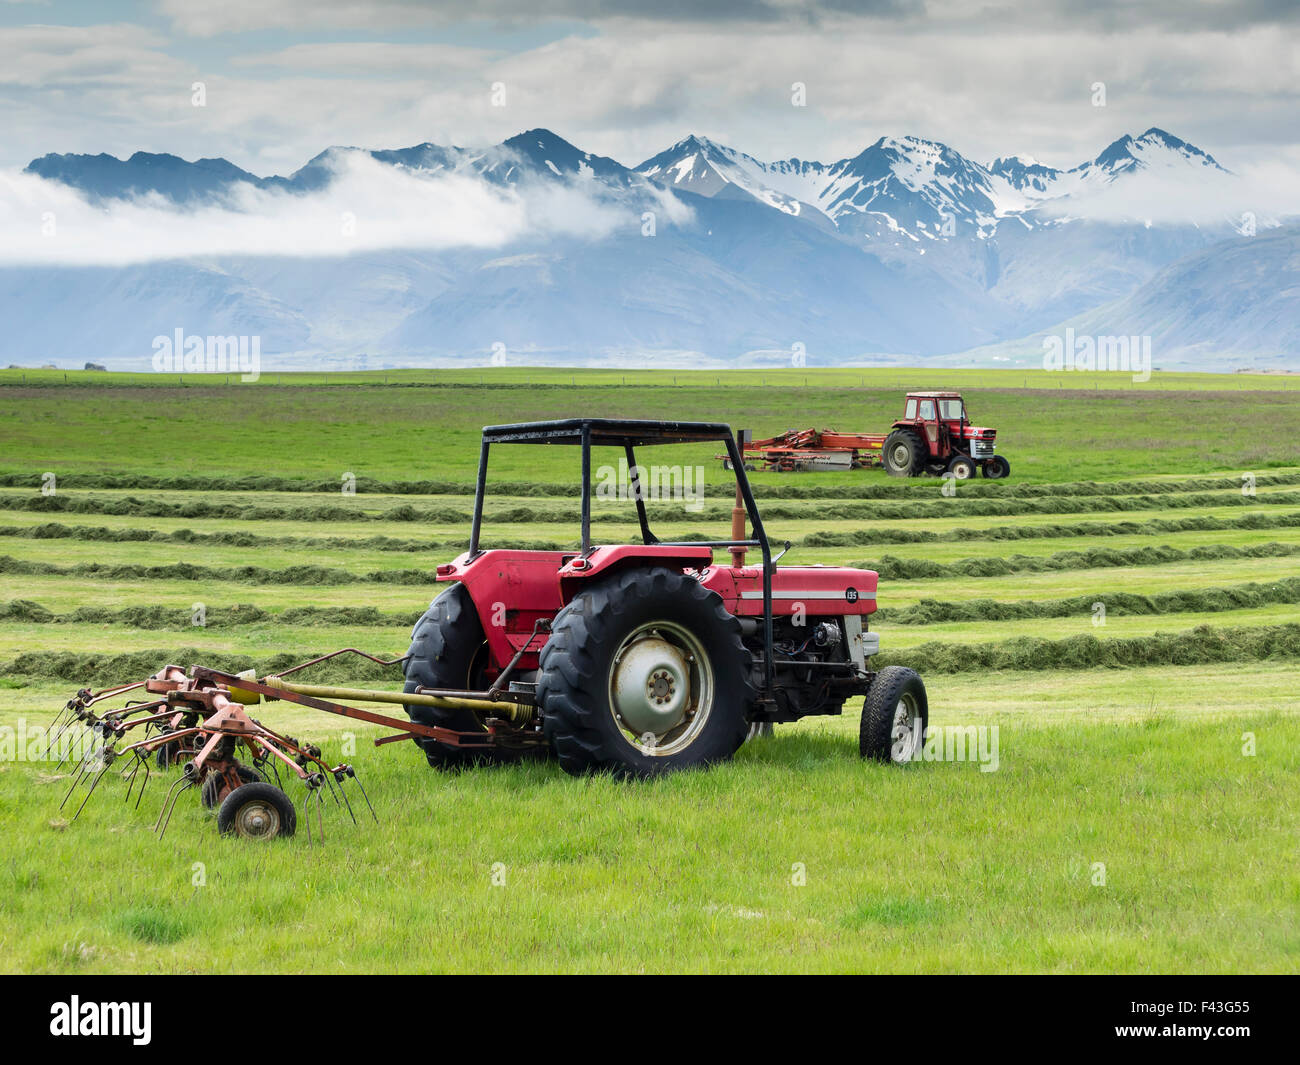 Two red tractors on a farm, working in a field cutting a grass crop. Stock Photo